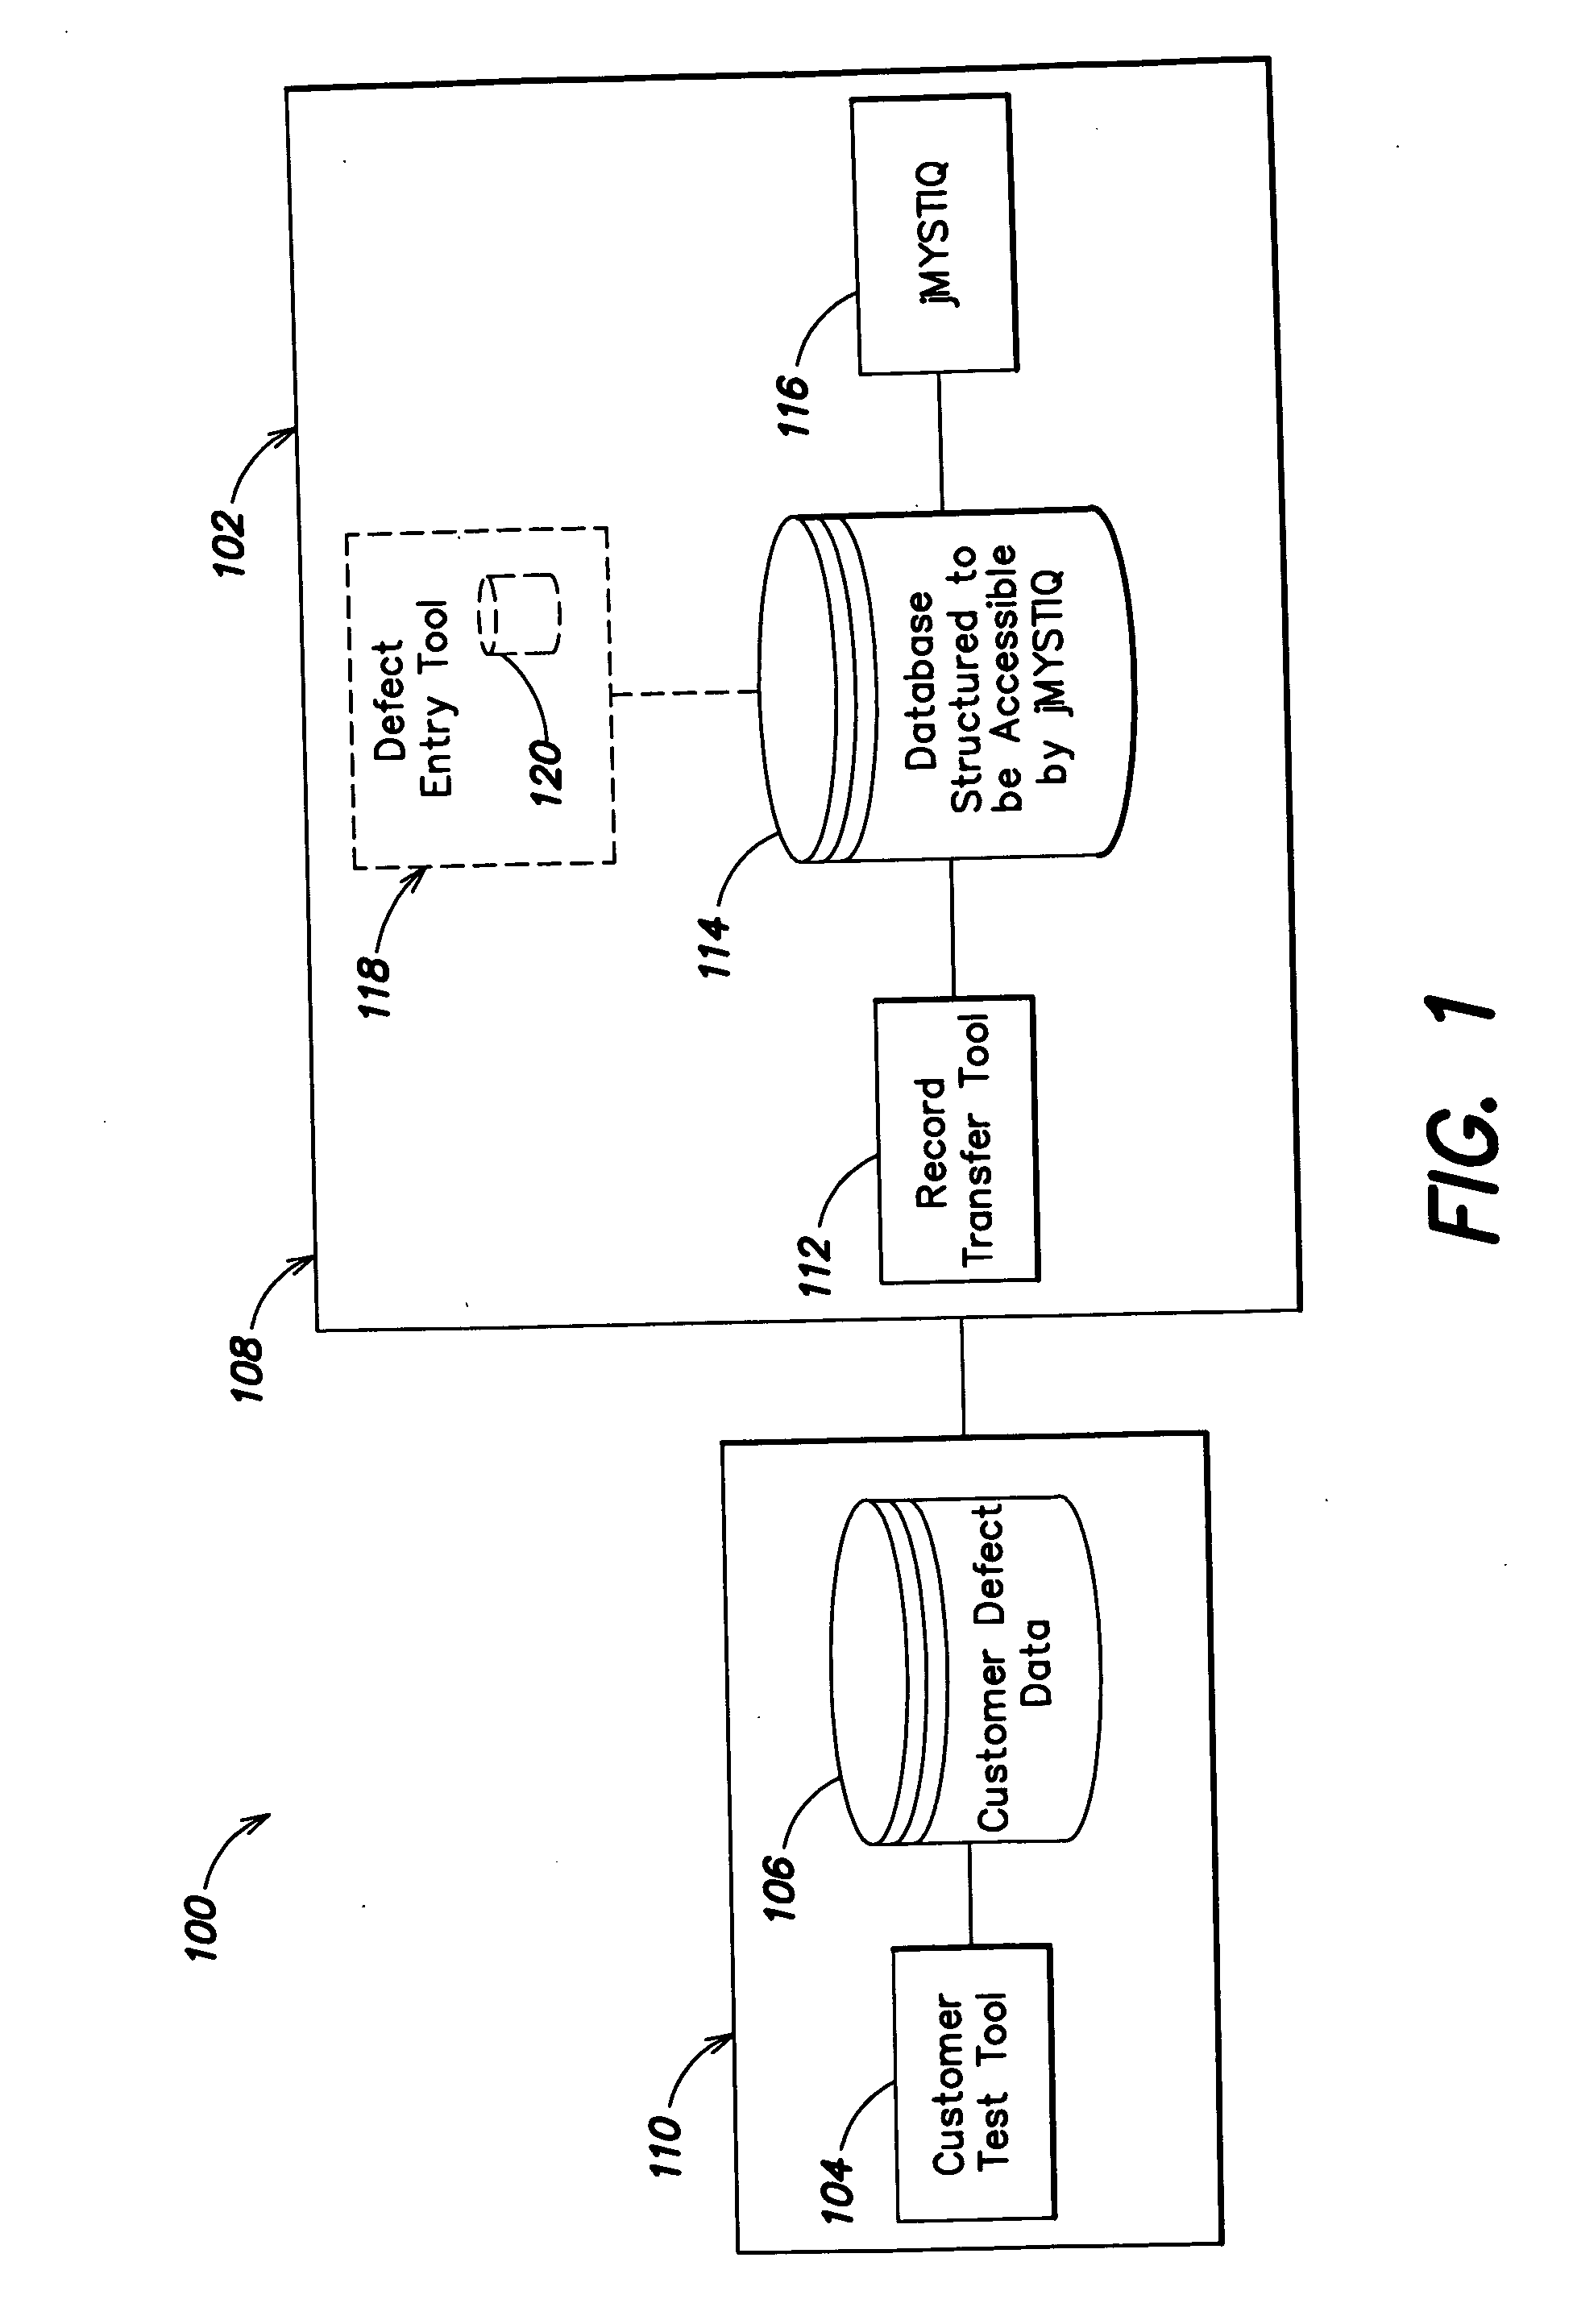 Methods and apparatus for defect reduction analysis